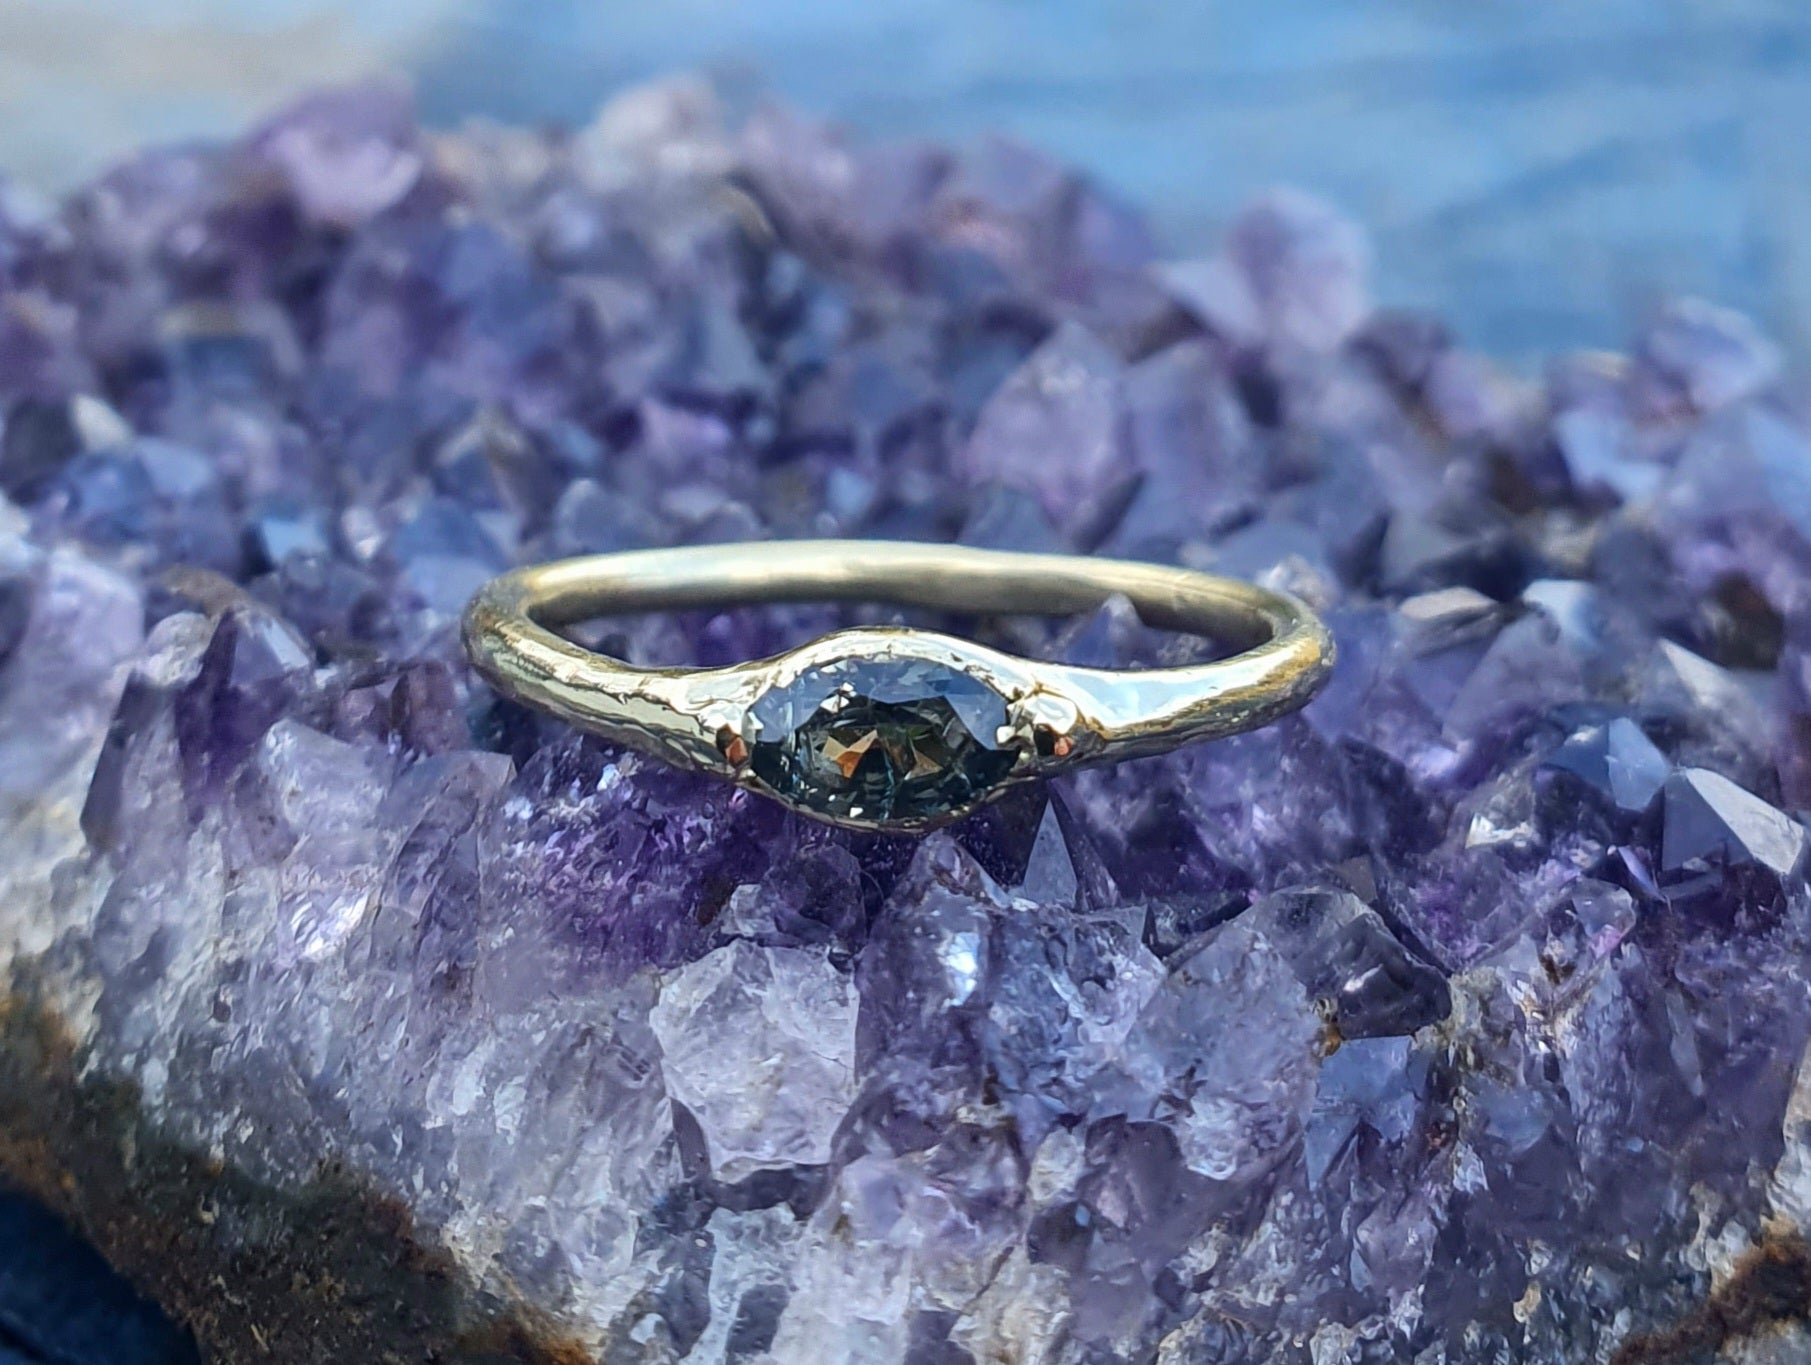 Chandra's Eye - 9k gold and blue sapphire ring